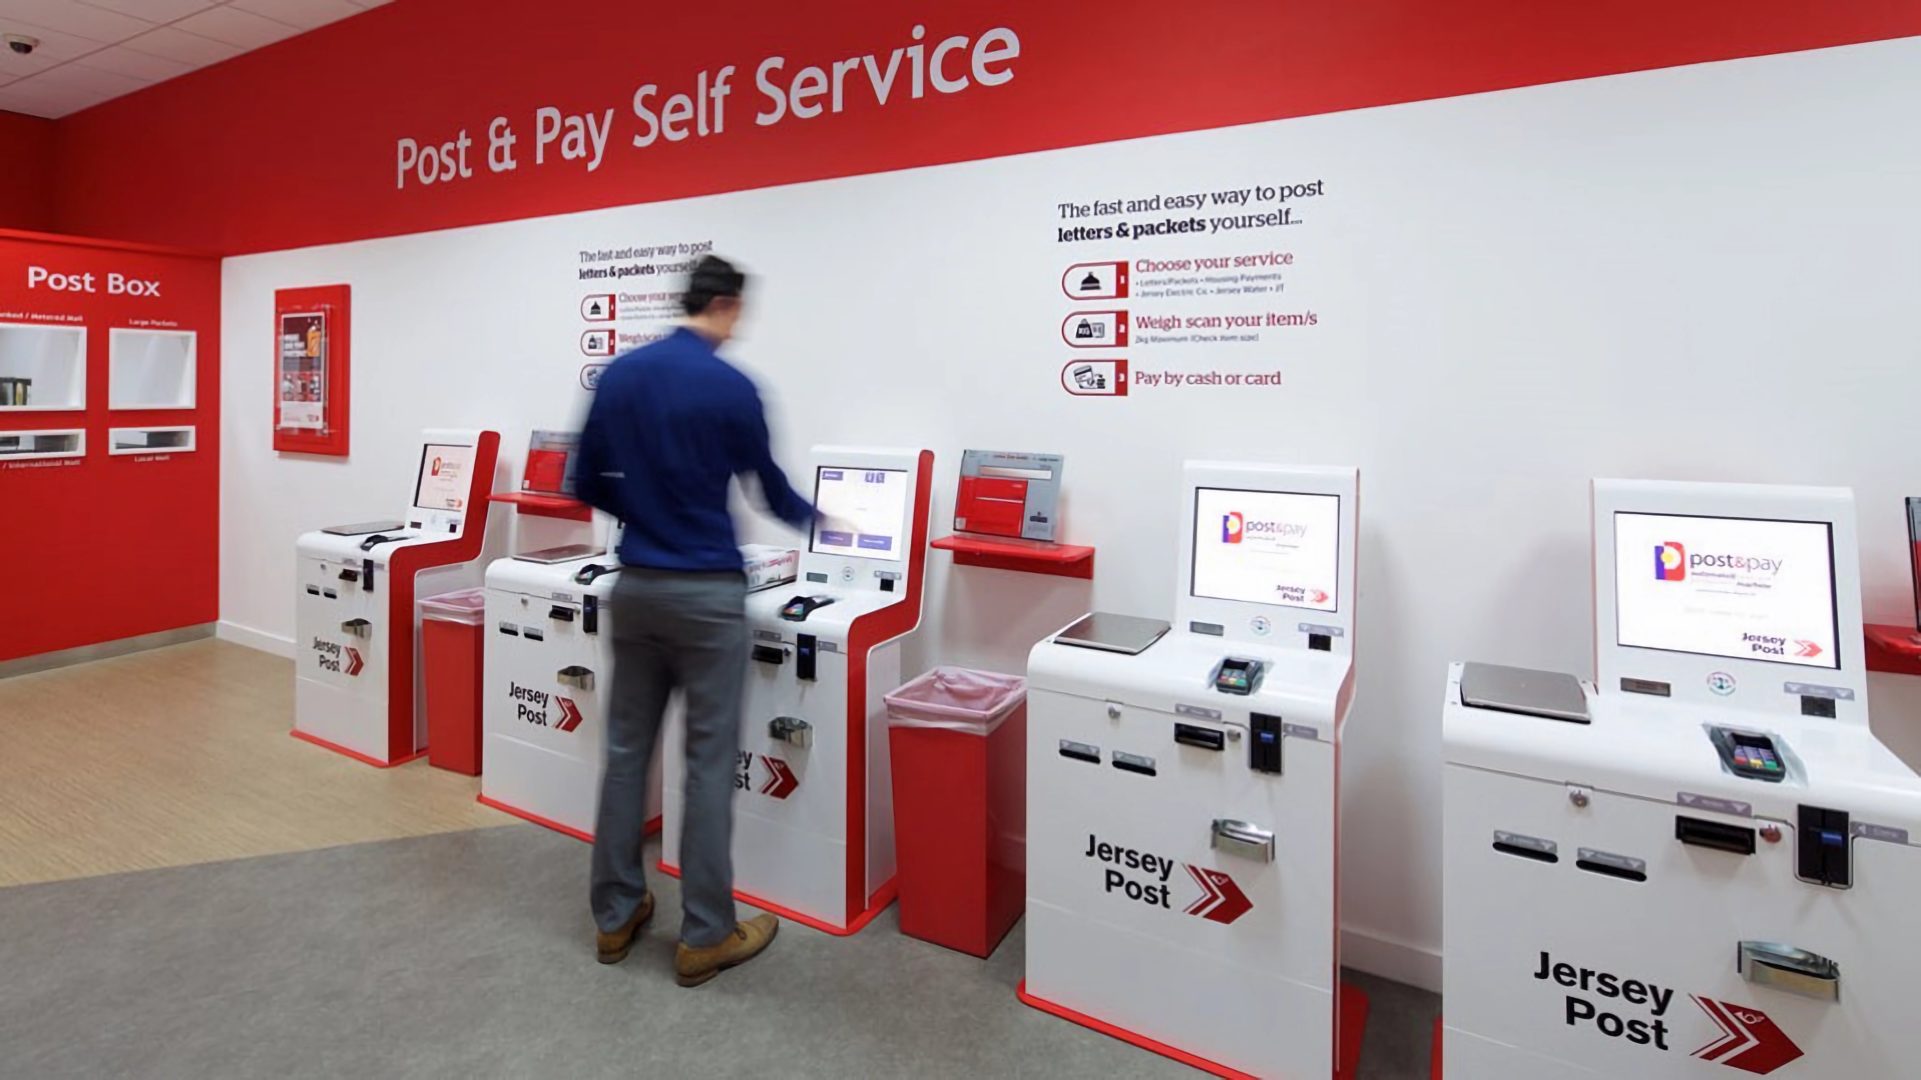 red and white smart postal kiosks with integrated scale allowing bill payments and stamp printing designed for pick up and drop off (PUDO)